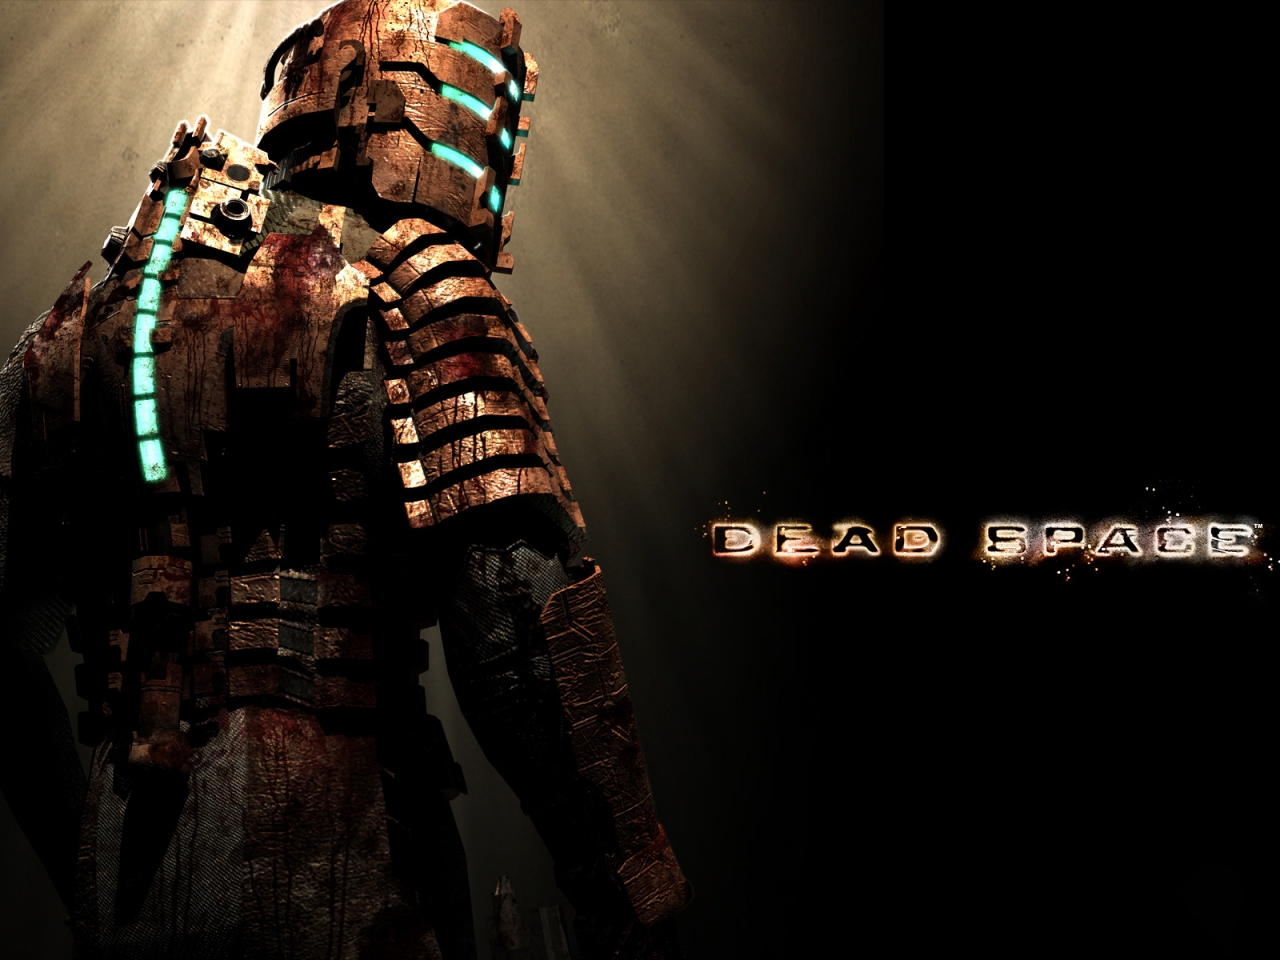 Dead Space for 1280 x 960 resolution